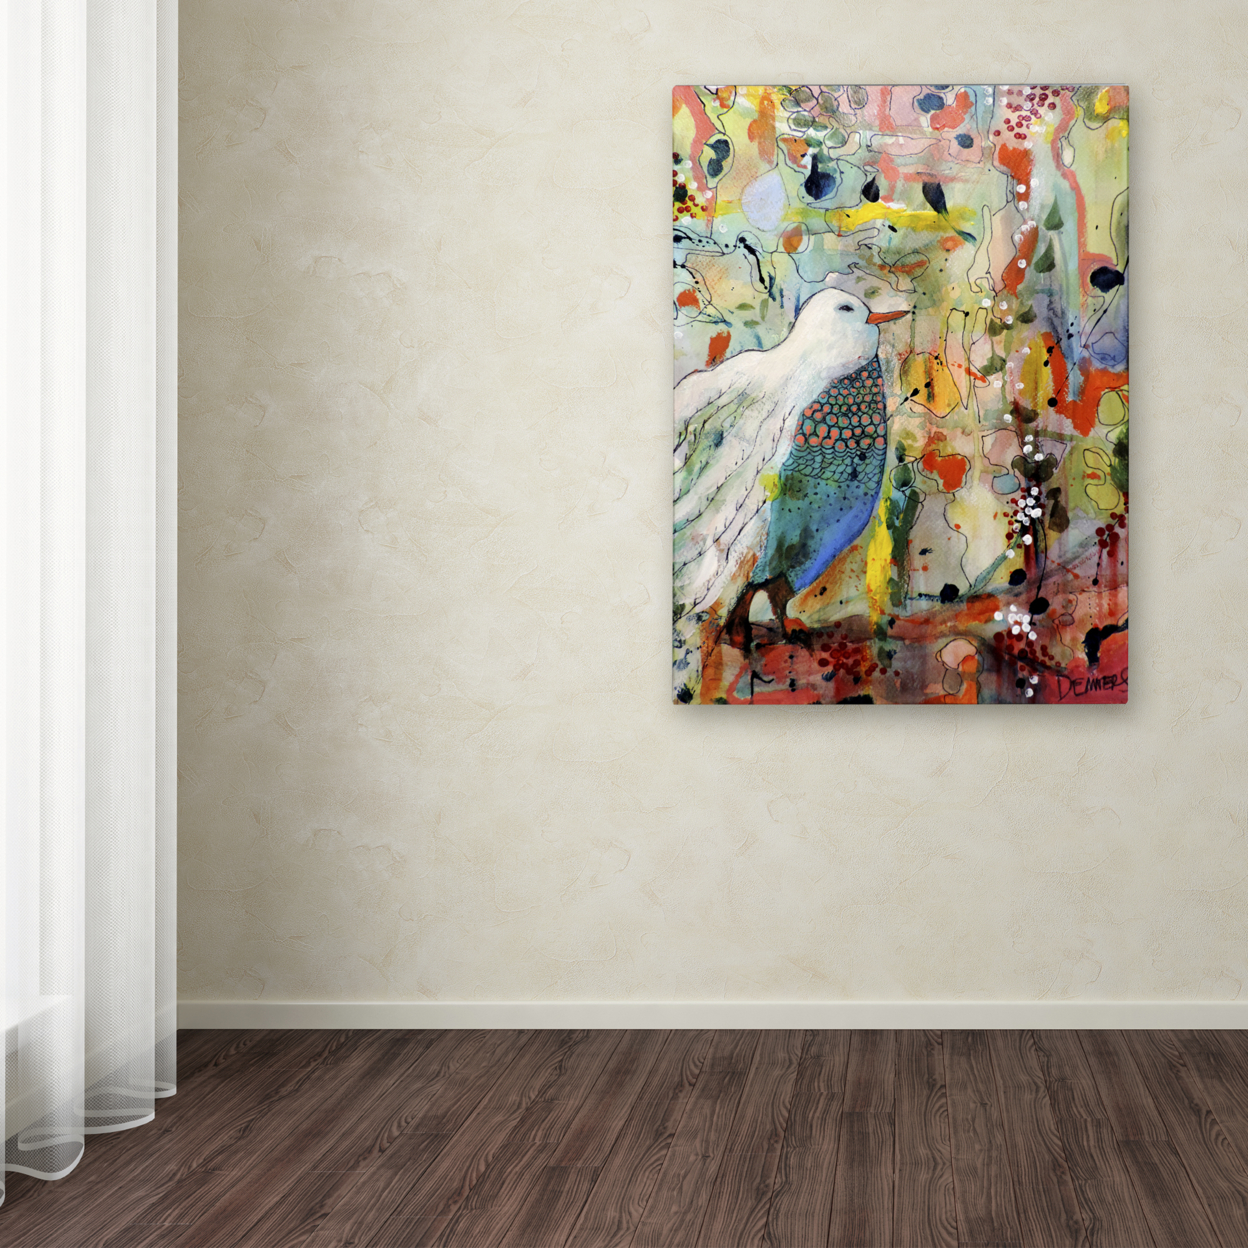 Sylvie Demers 'Vers Toi' Canvas Wall Art 35 X 47 Inches